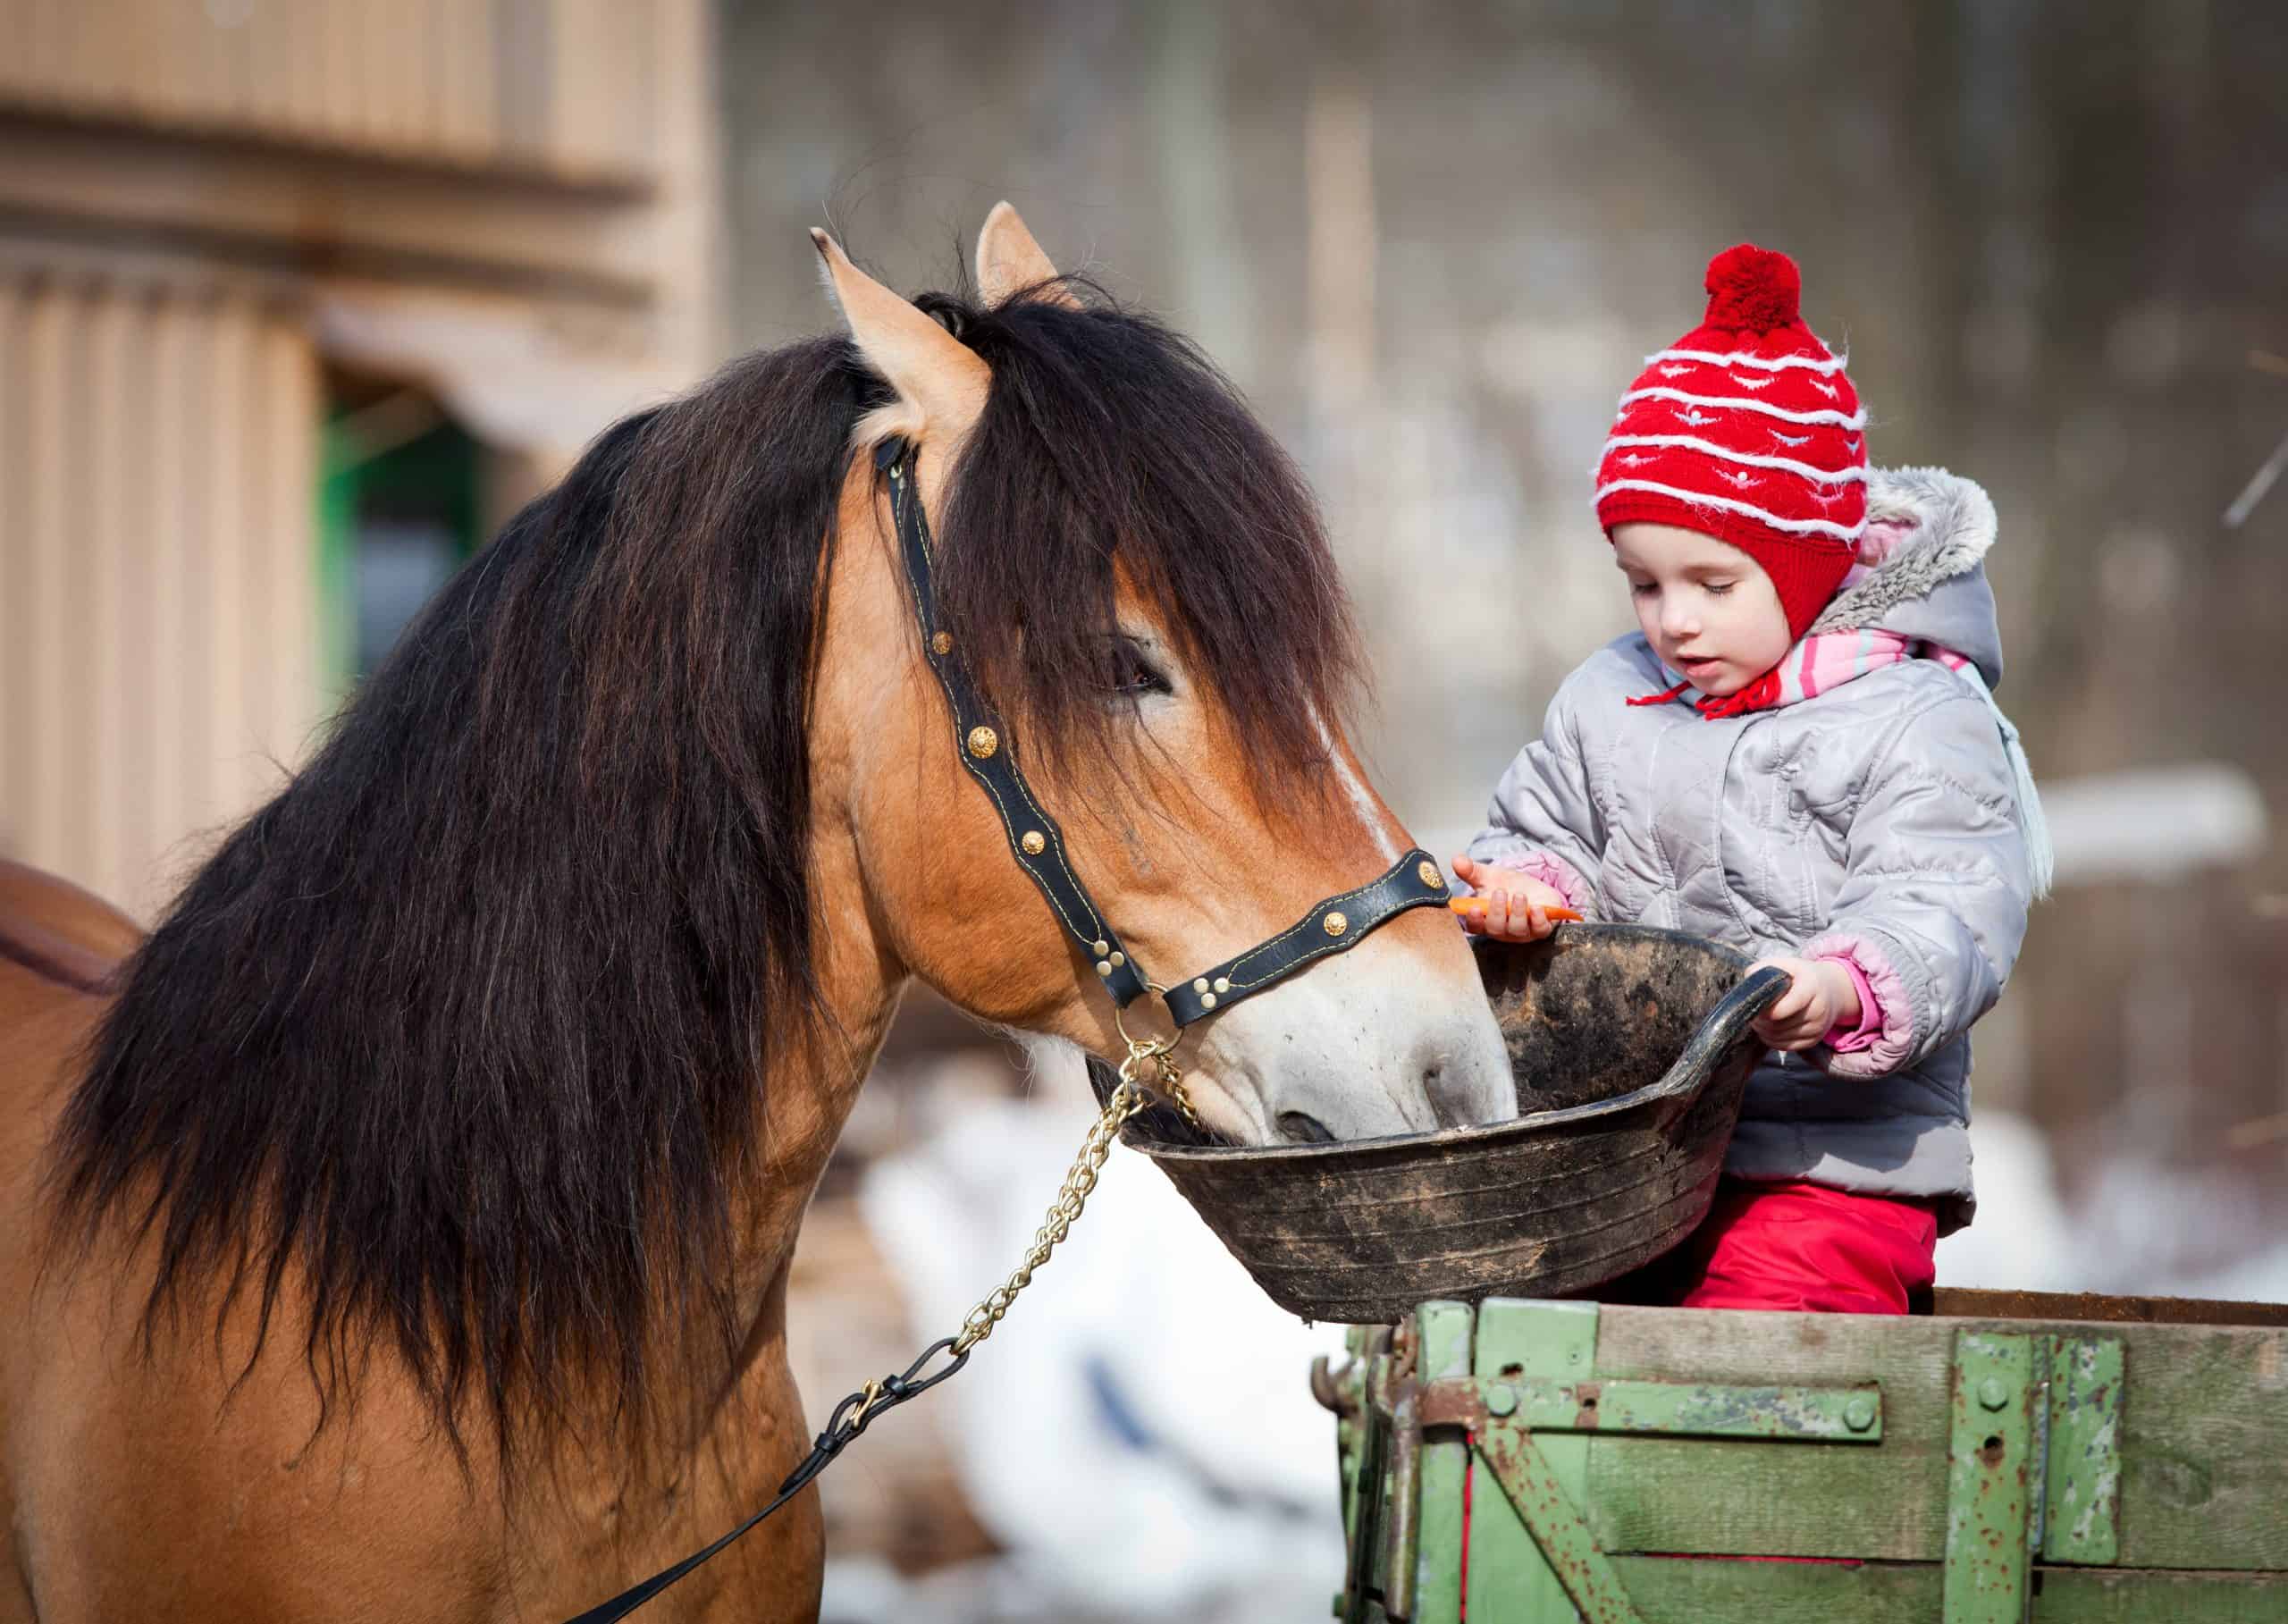 Girl feeding a horse, sitting on a cart in the winter.